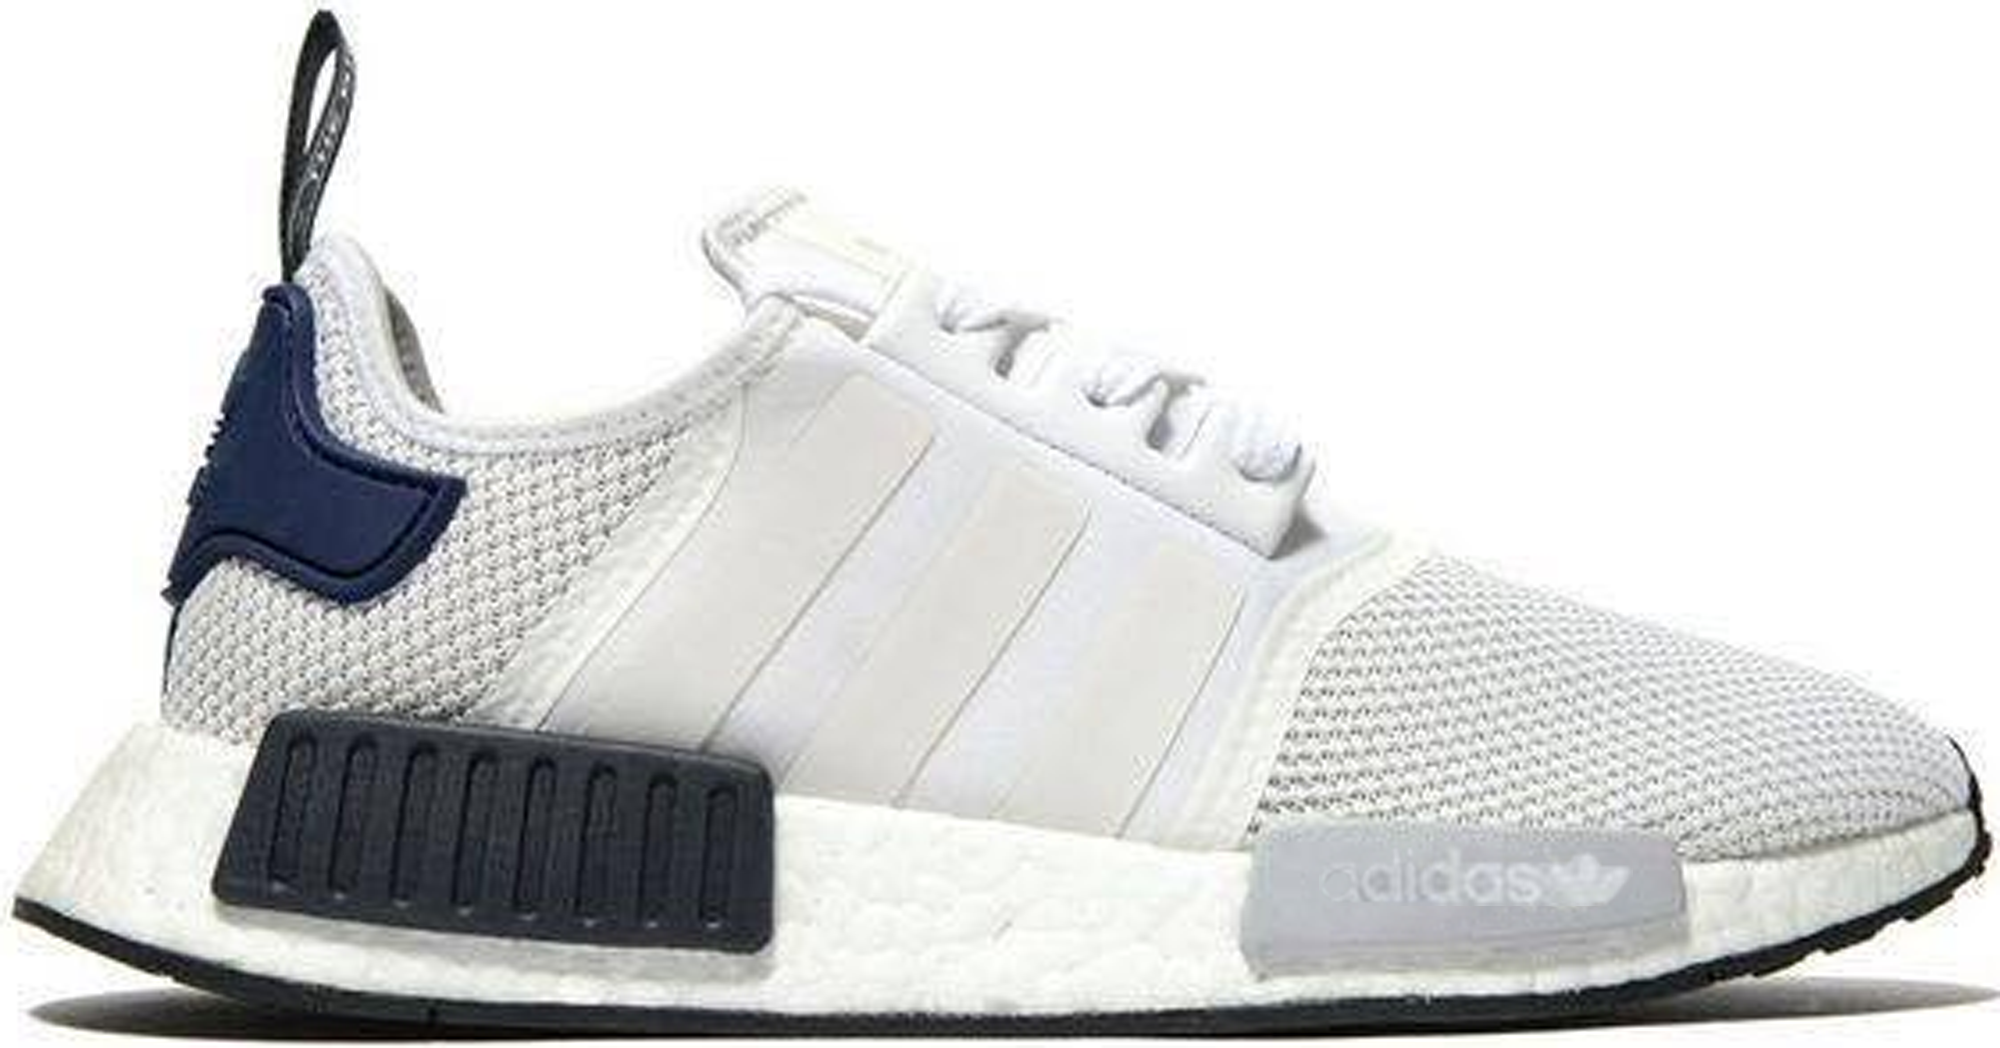 white and gray nmd